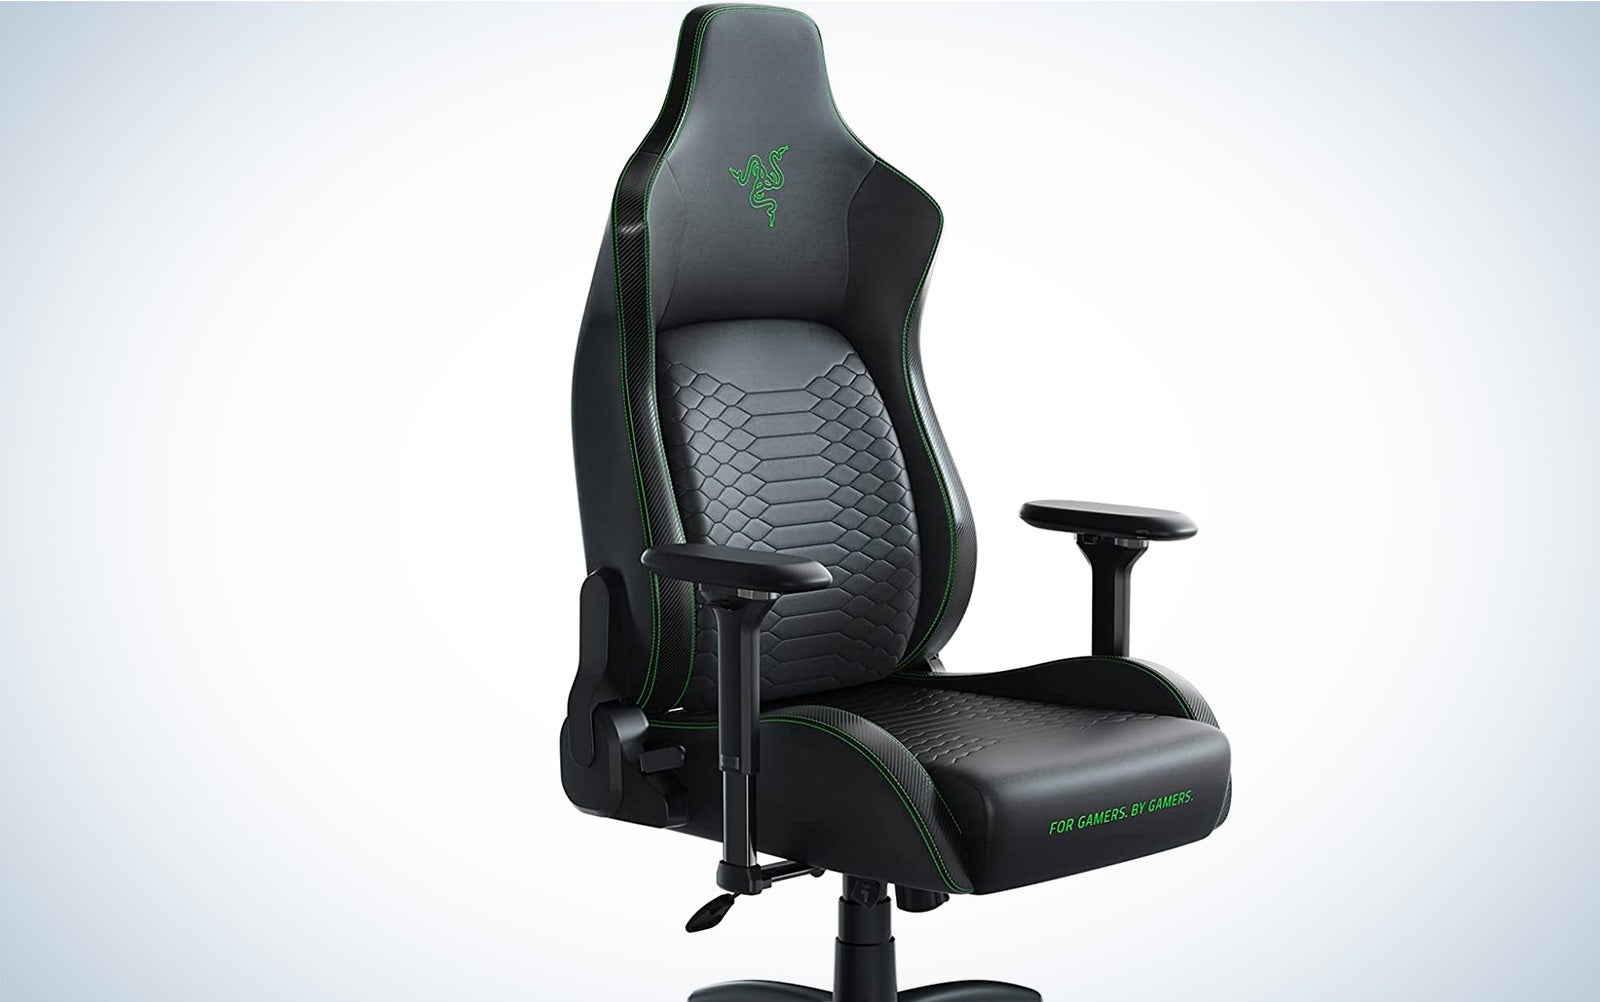 The Razer office chair for lumbar support in black